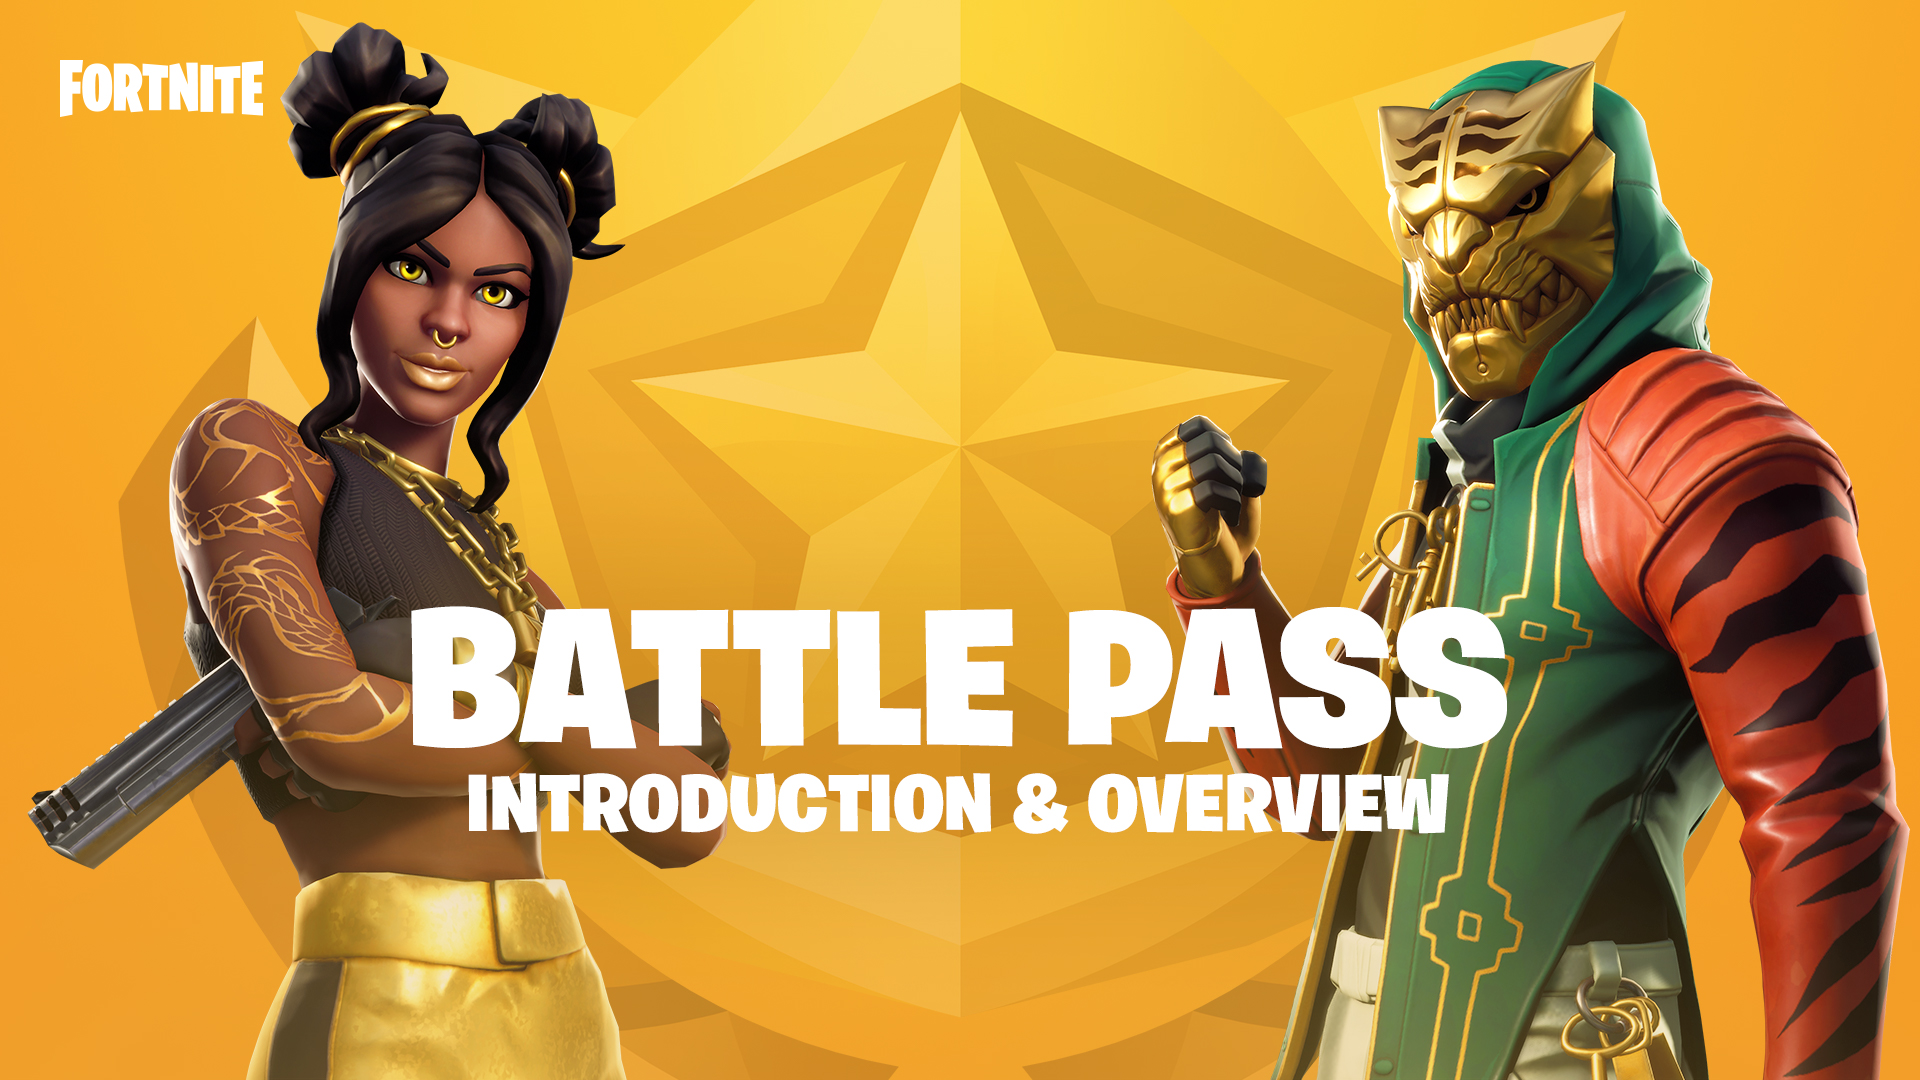 play fortnite battle pass introduction overview with two characters on an orange star background - is fortnite free to download on xbox one